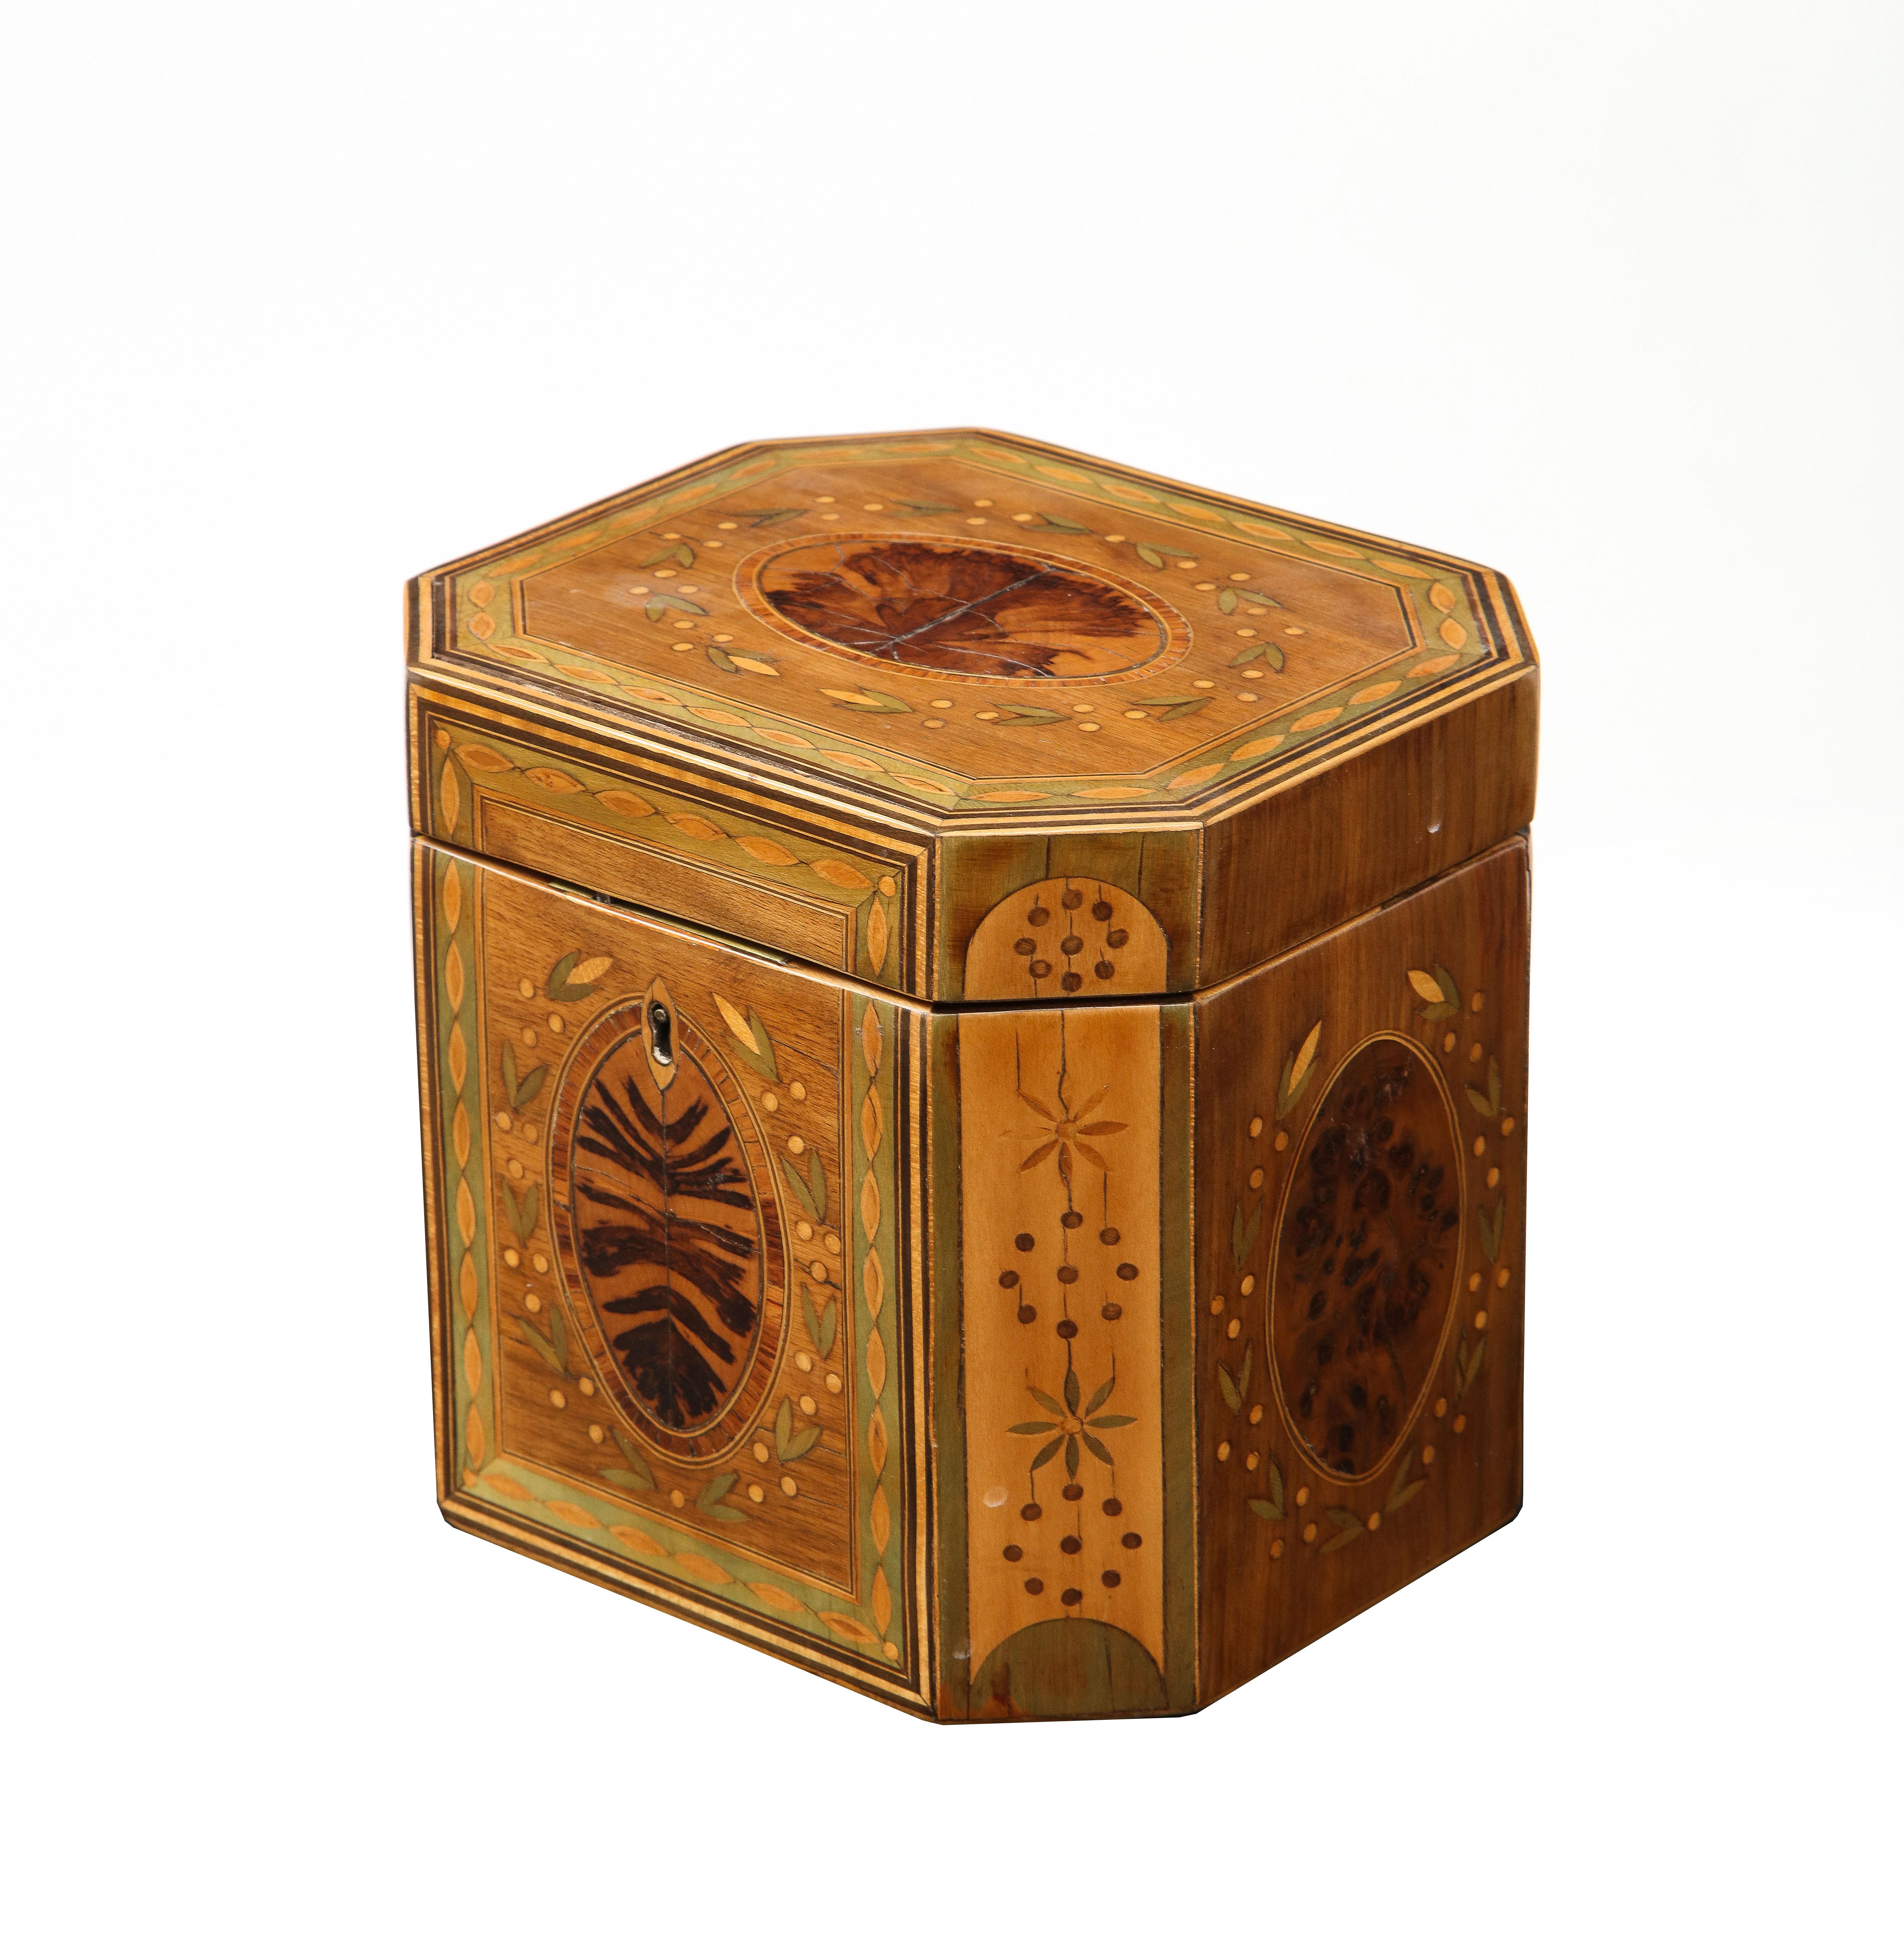 Fine George III octagonal tea caddy inlaid with various woods on a harewood ground, the central panels veneered with coucous wood and banded by holly stringing around a kingwood band, vines and berried inlaid onto harewood ground with dyed fustic